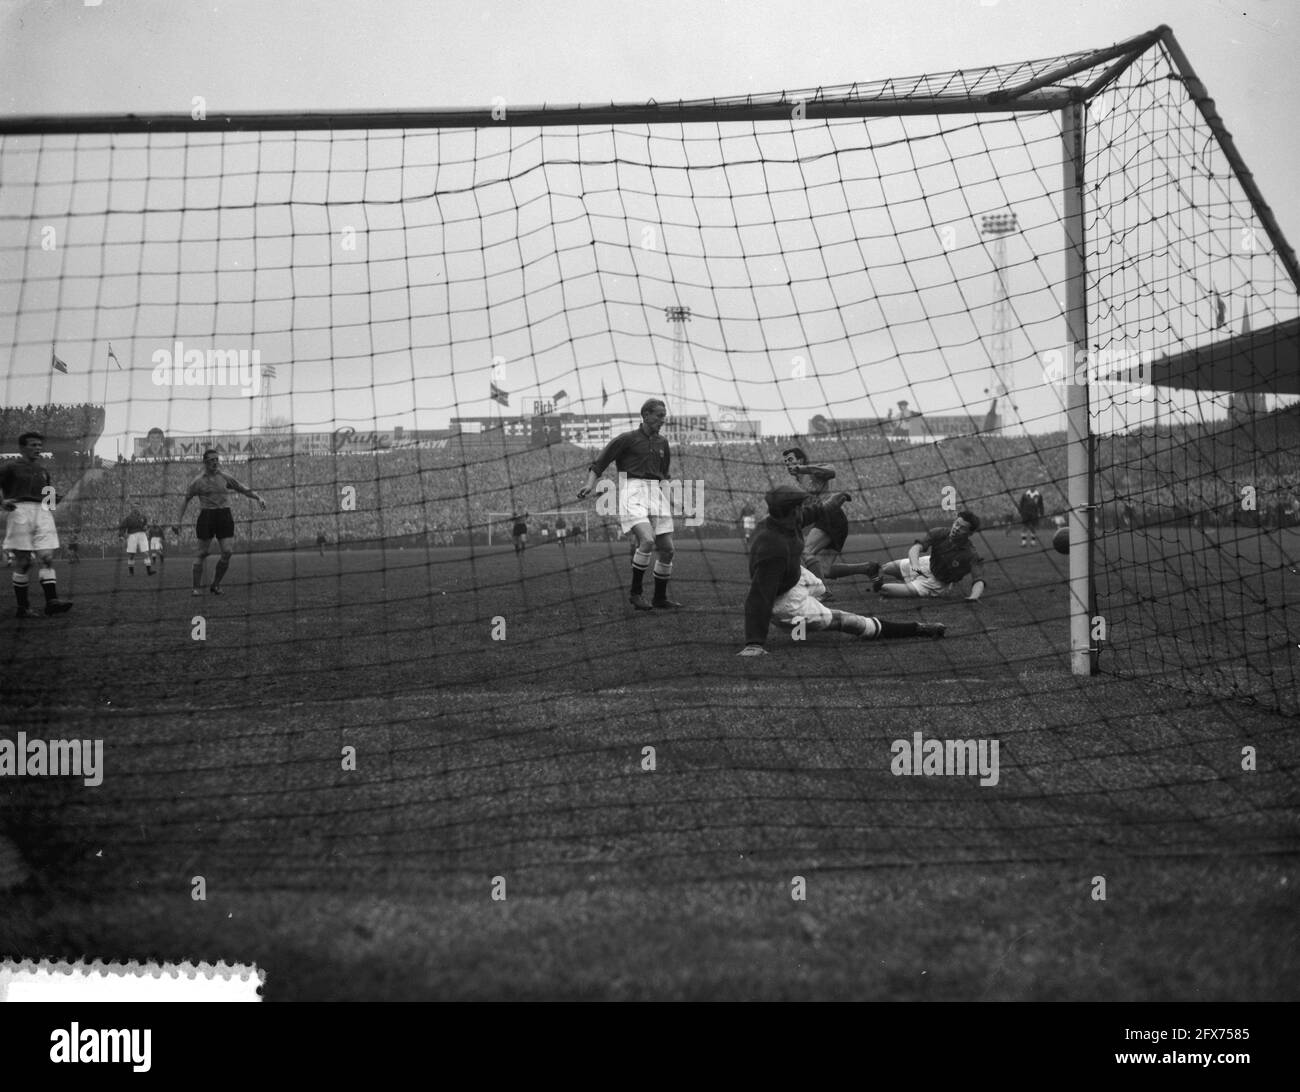 Coen Moulijn in action in front of the Danish goal, November 4, 1956, sports, soccer, The Netherlands, 20th century press agency photo, news to remember, documentary, historic photography 1945-1990, visual stories, human history of the Twentieth Century, capturing moments in time Stock Photo